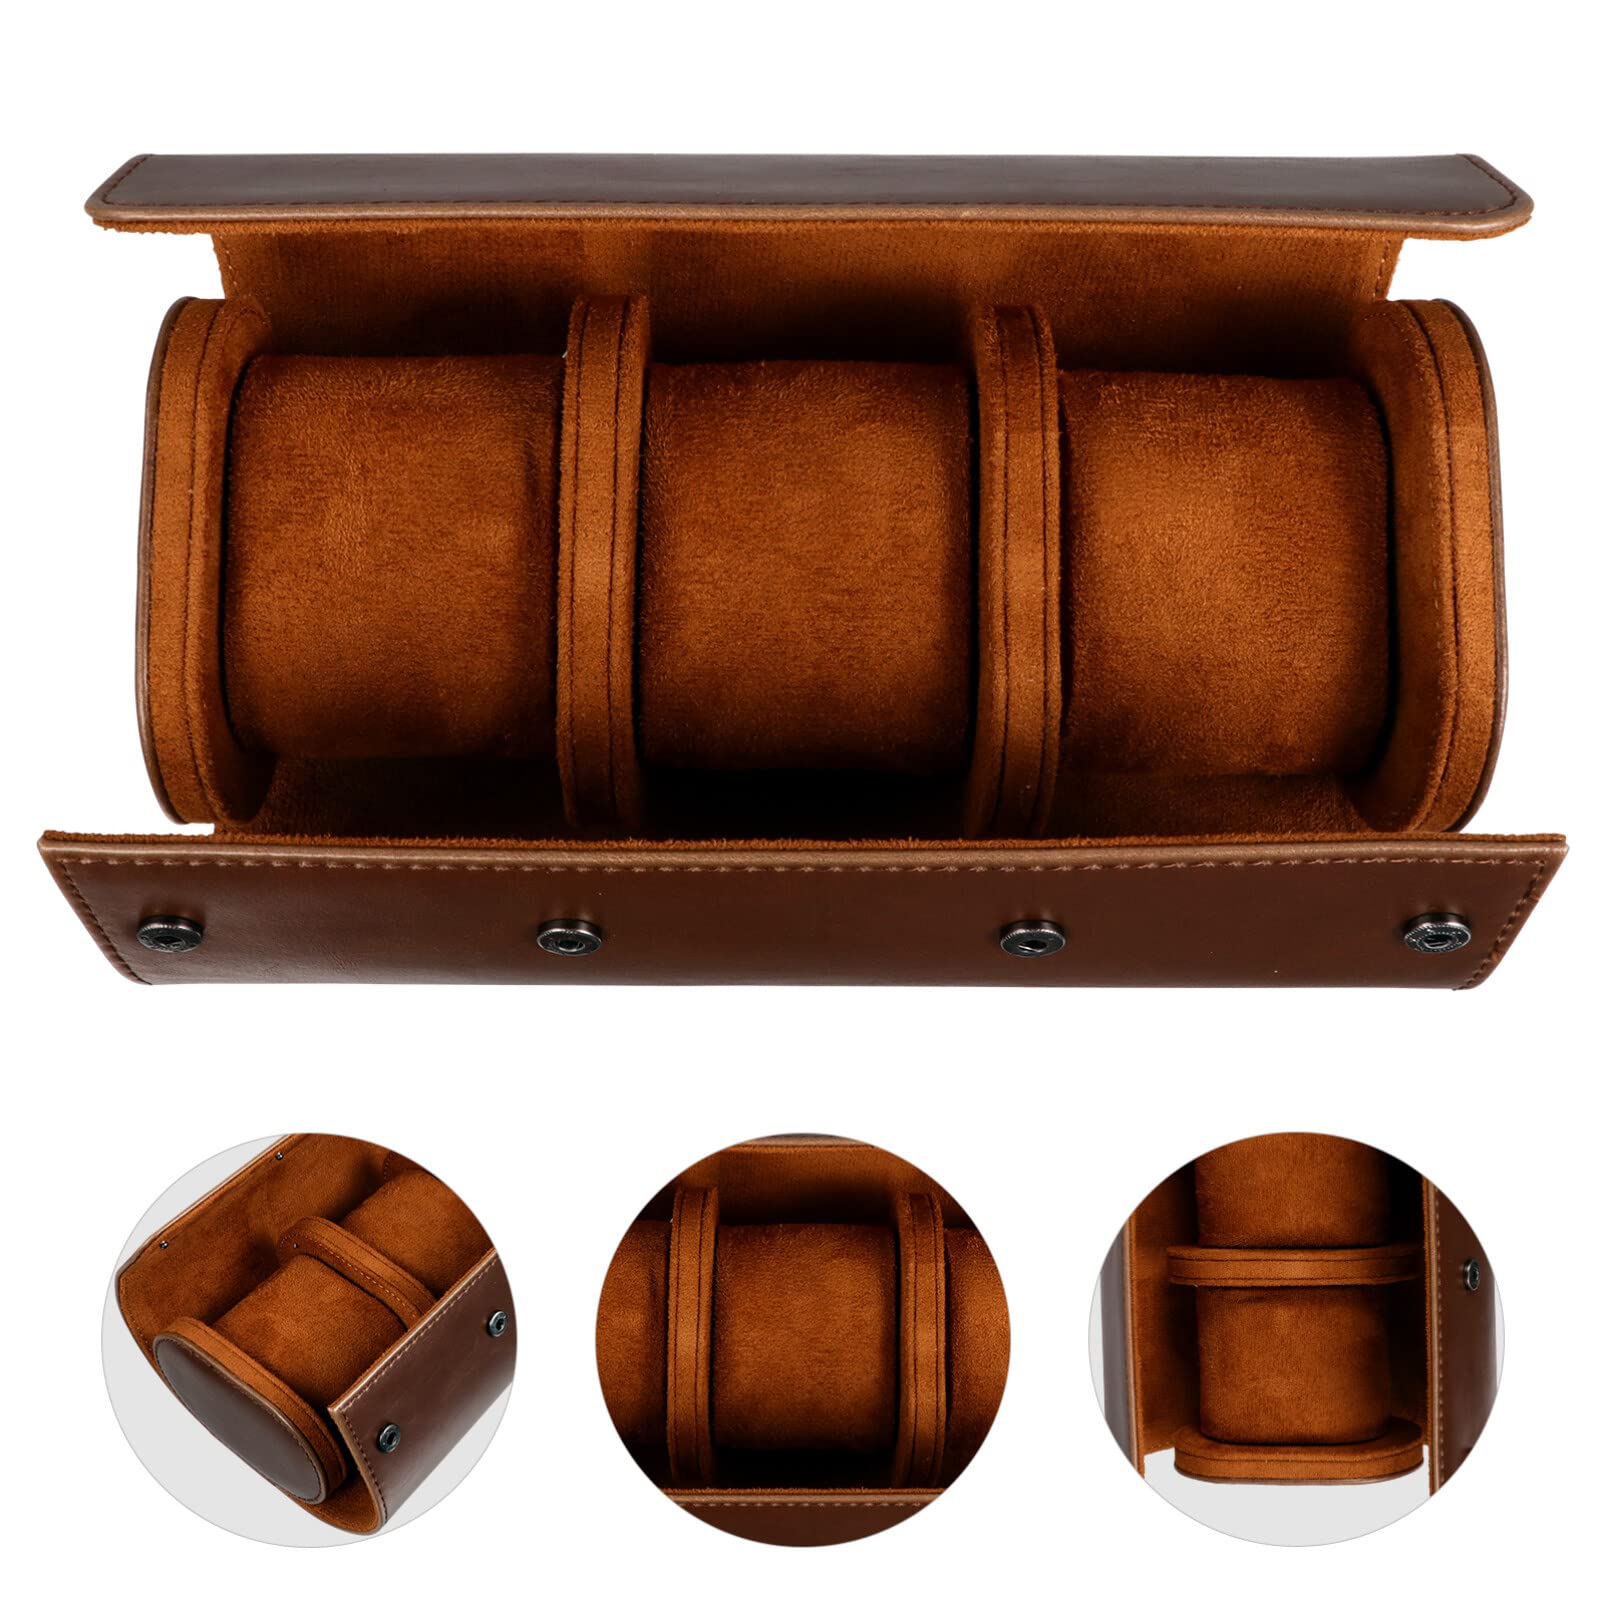 ULTECHNOVO Watch Box Storage Roll, 3 Slots Elastic PU Watch Case- Leather Vintage Display Case Organizer for Watch Jewelry, Portable Use for Traveling